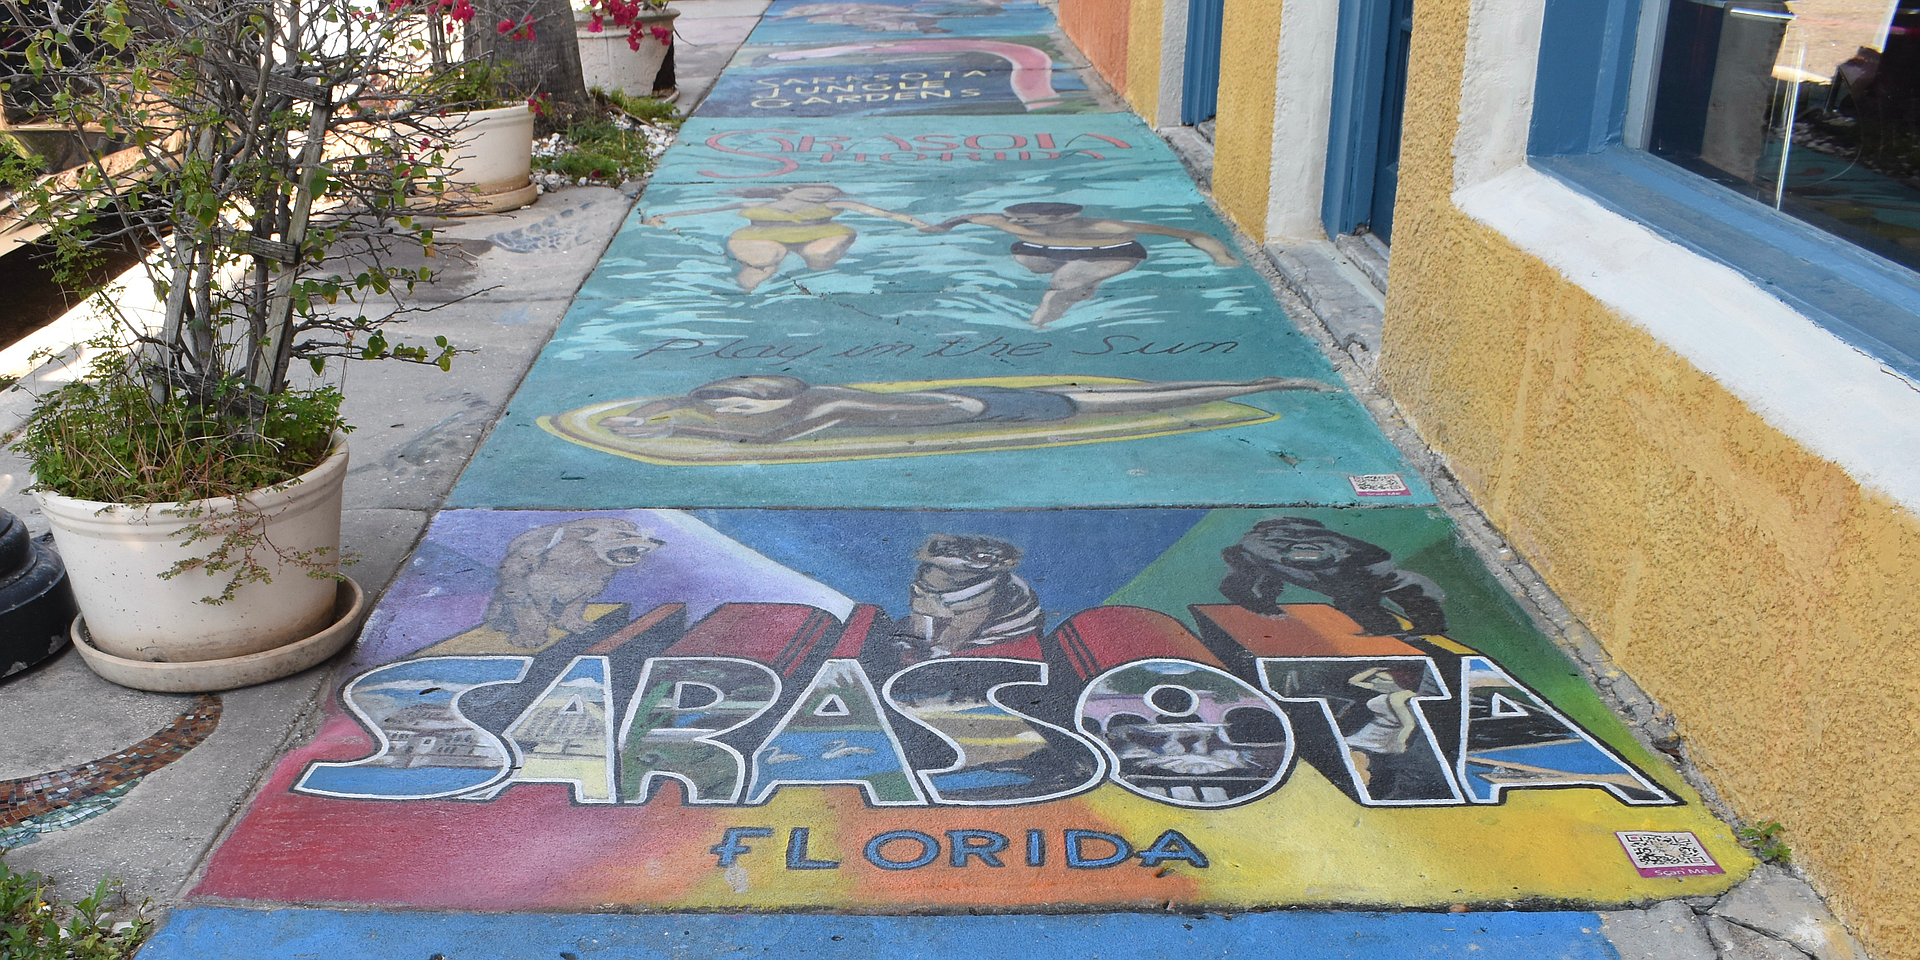 The Avenue of Art is intended to highlight the history and culture of Sarasota.